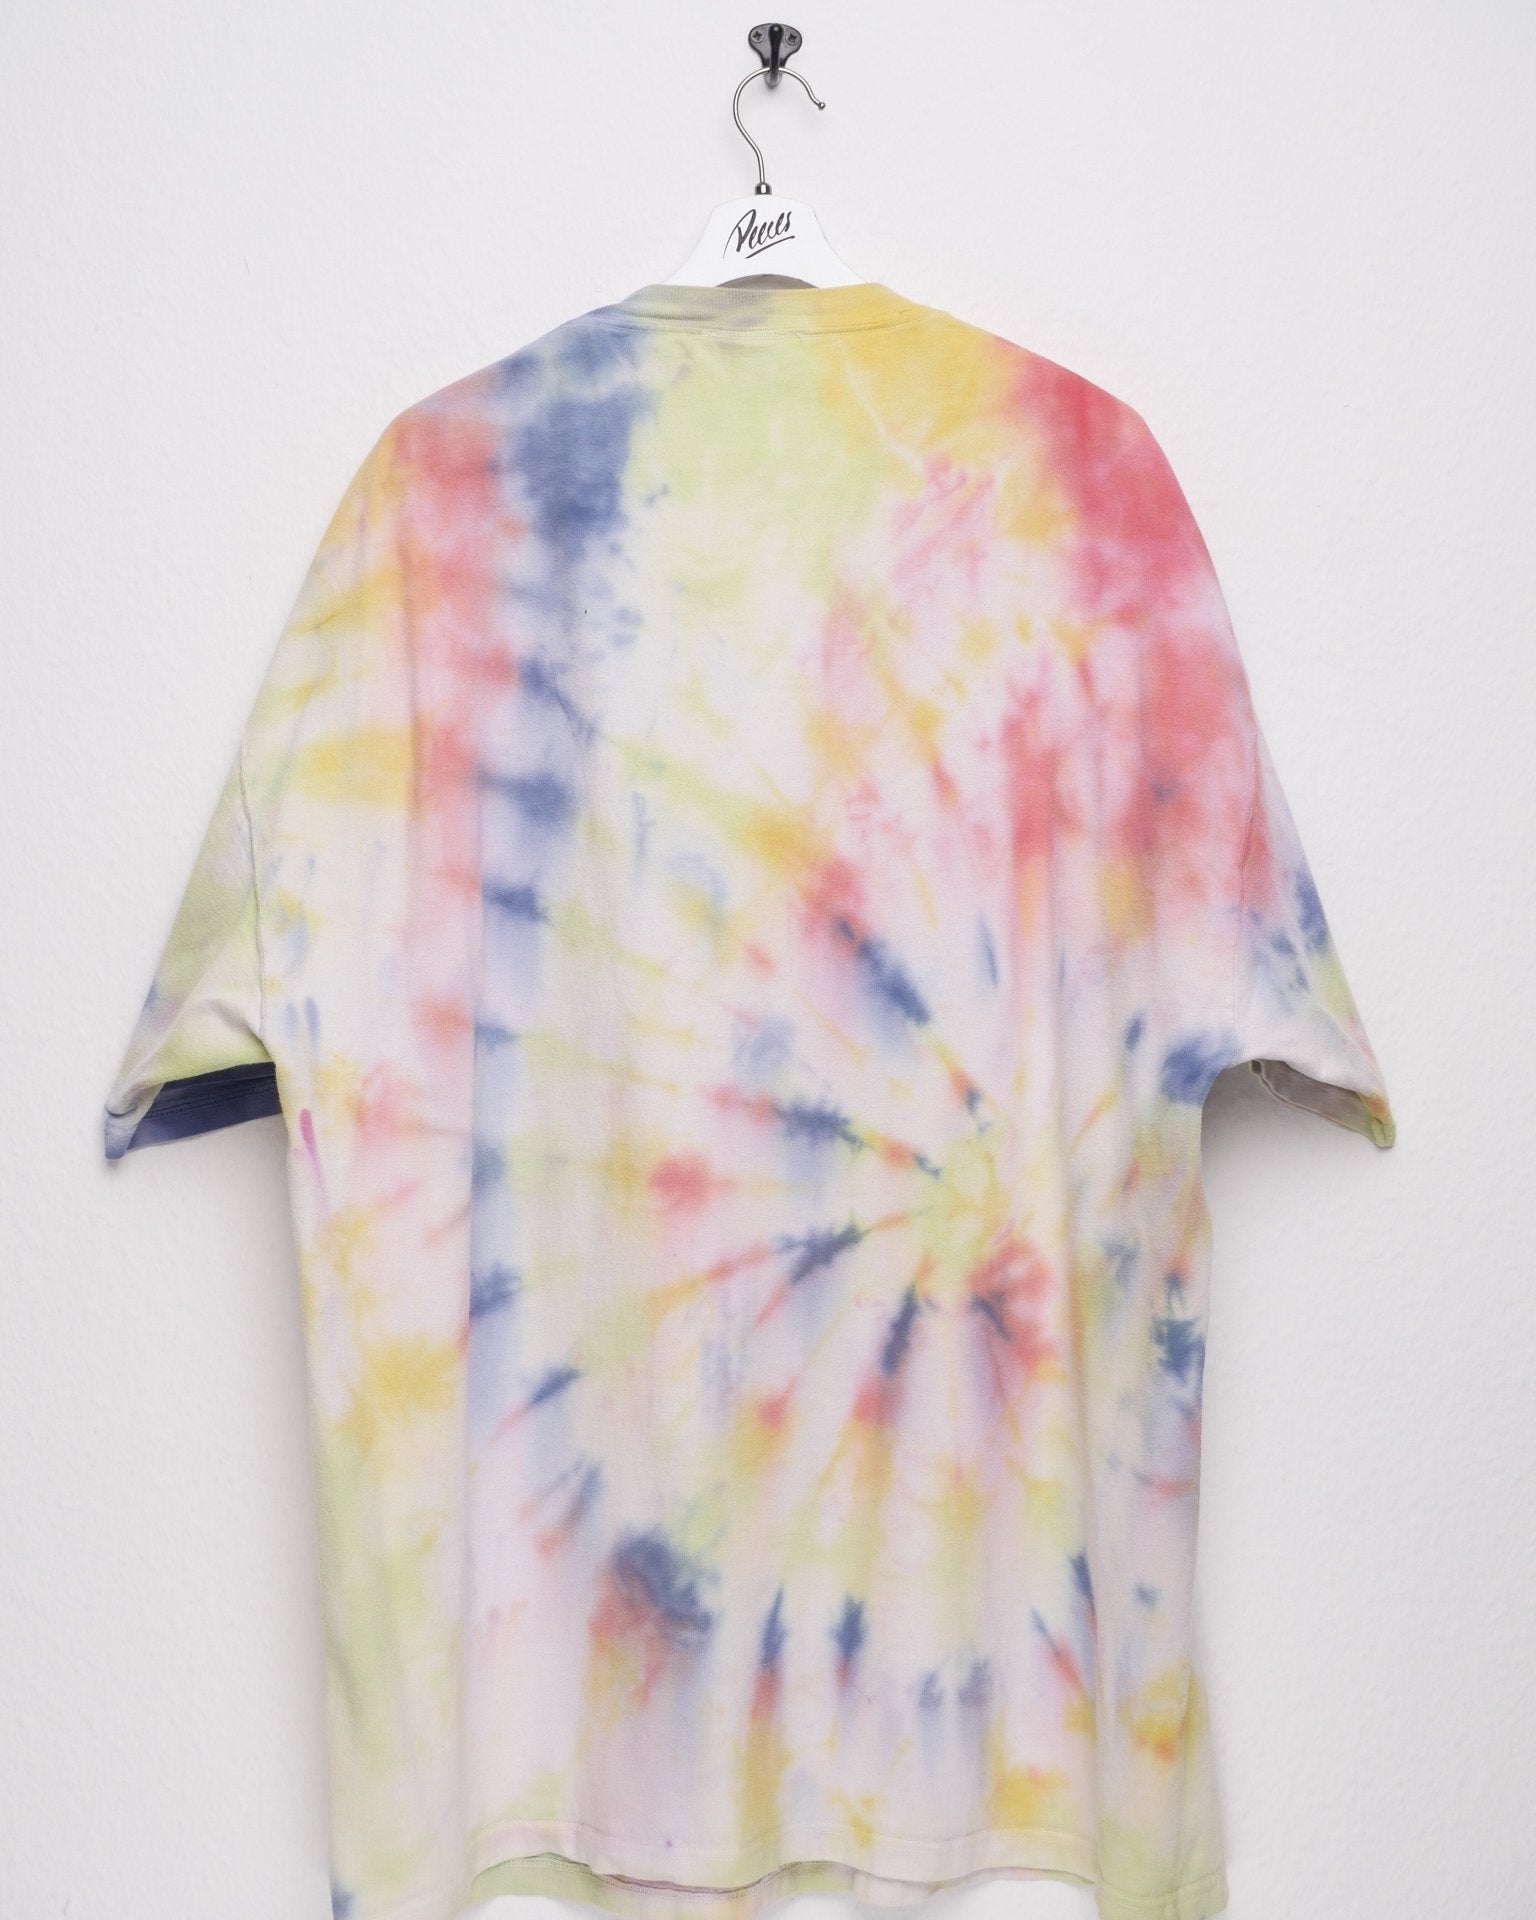 harley embroidered Logo Tie Dye Shirt - Peeces